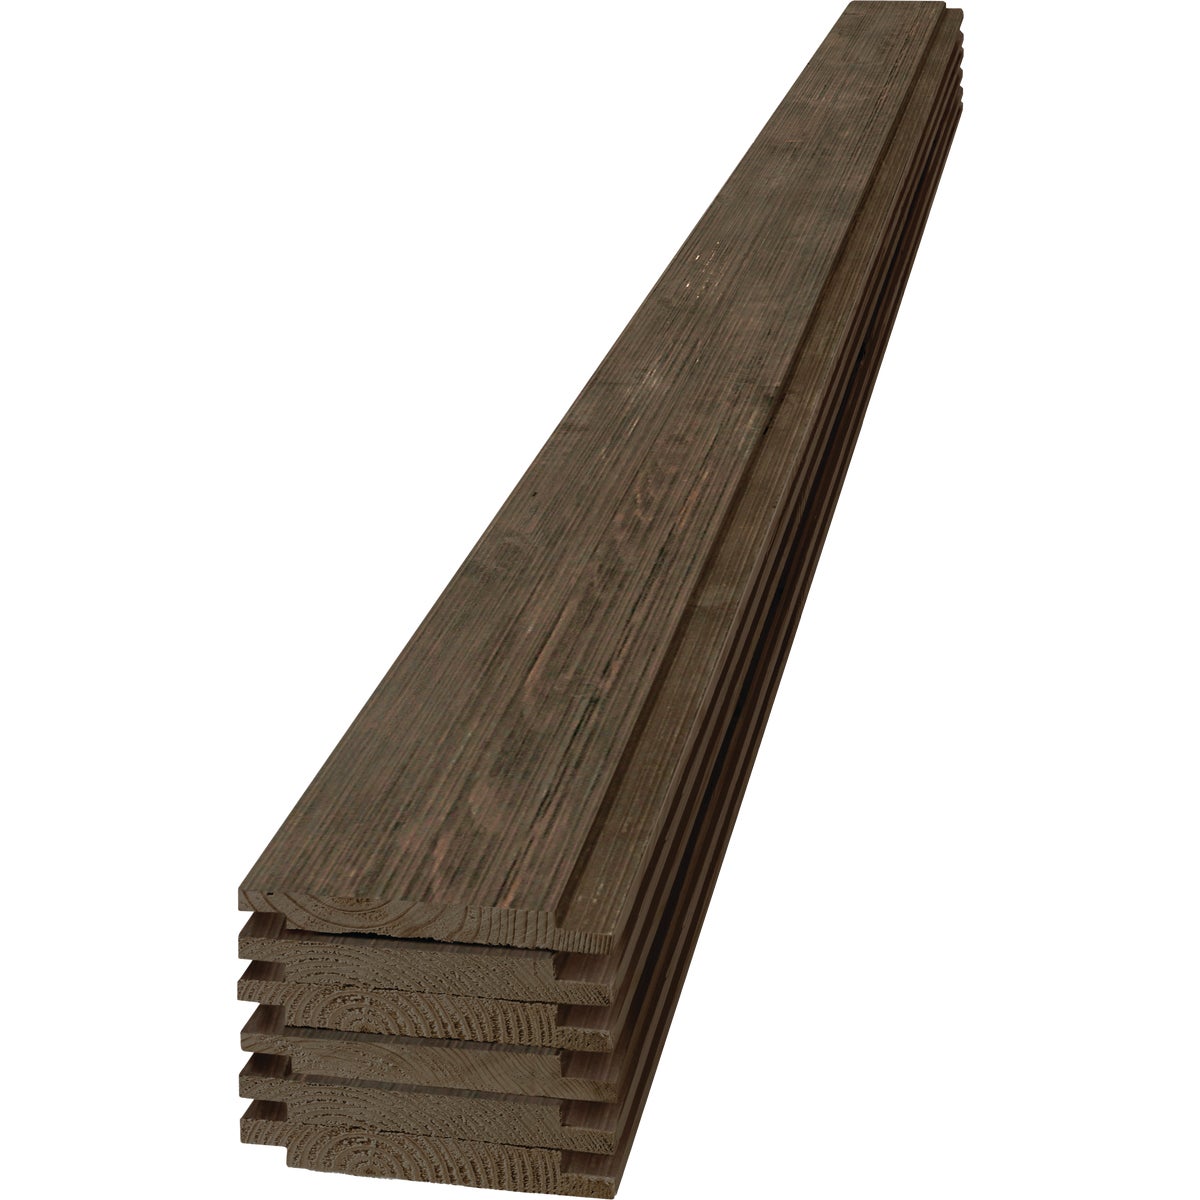 UFP-Edge 6 In. W x 8 Ft. L x 1 In. Thick Brown Wood Rustic Shiplap Board (18.48 Sq. Ft./6-Pack)